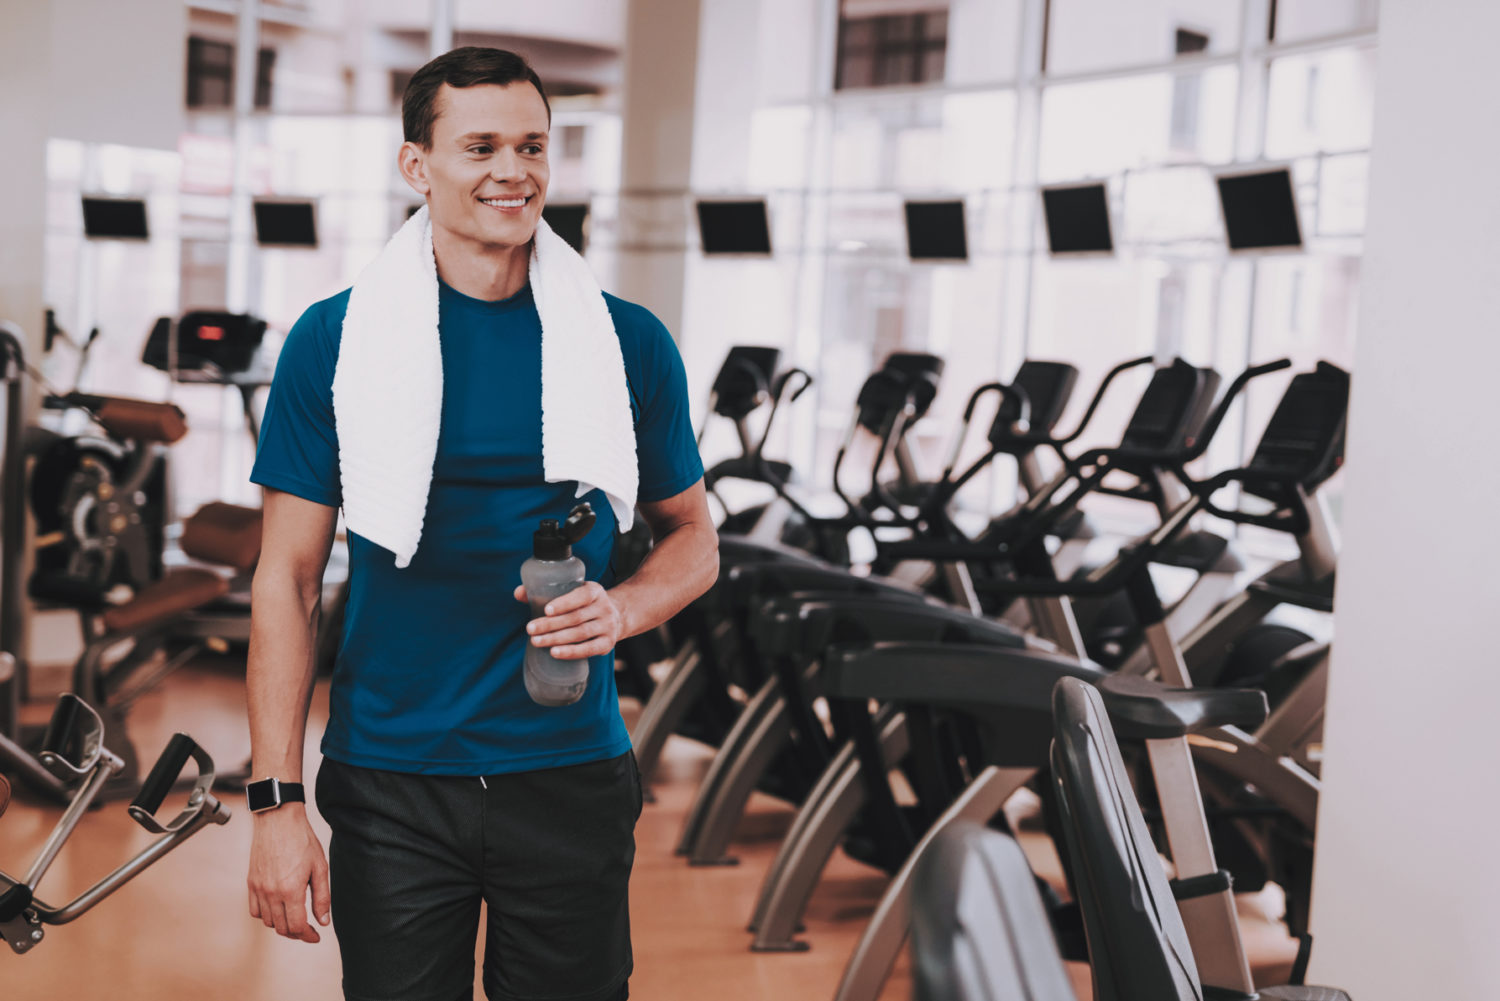 Man Visiting a Hotel Fitness Center